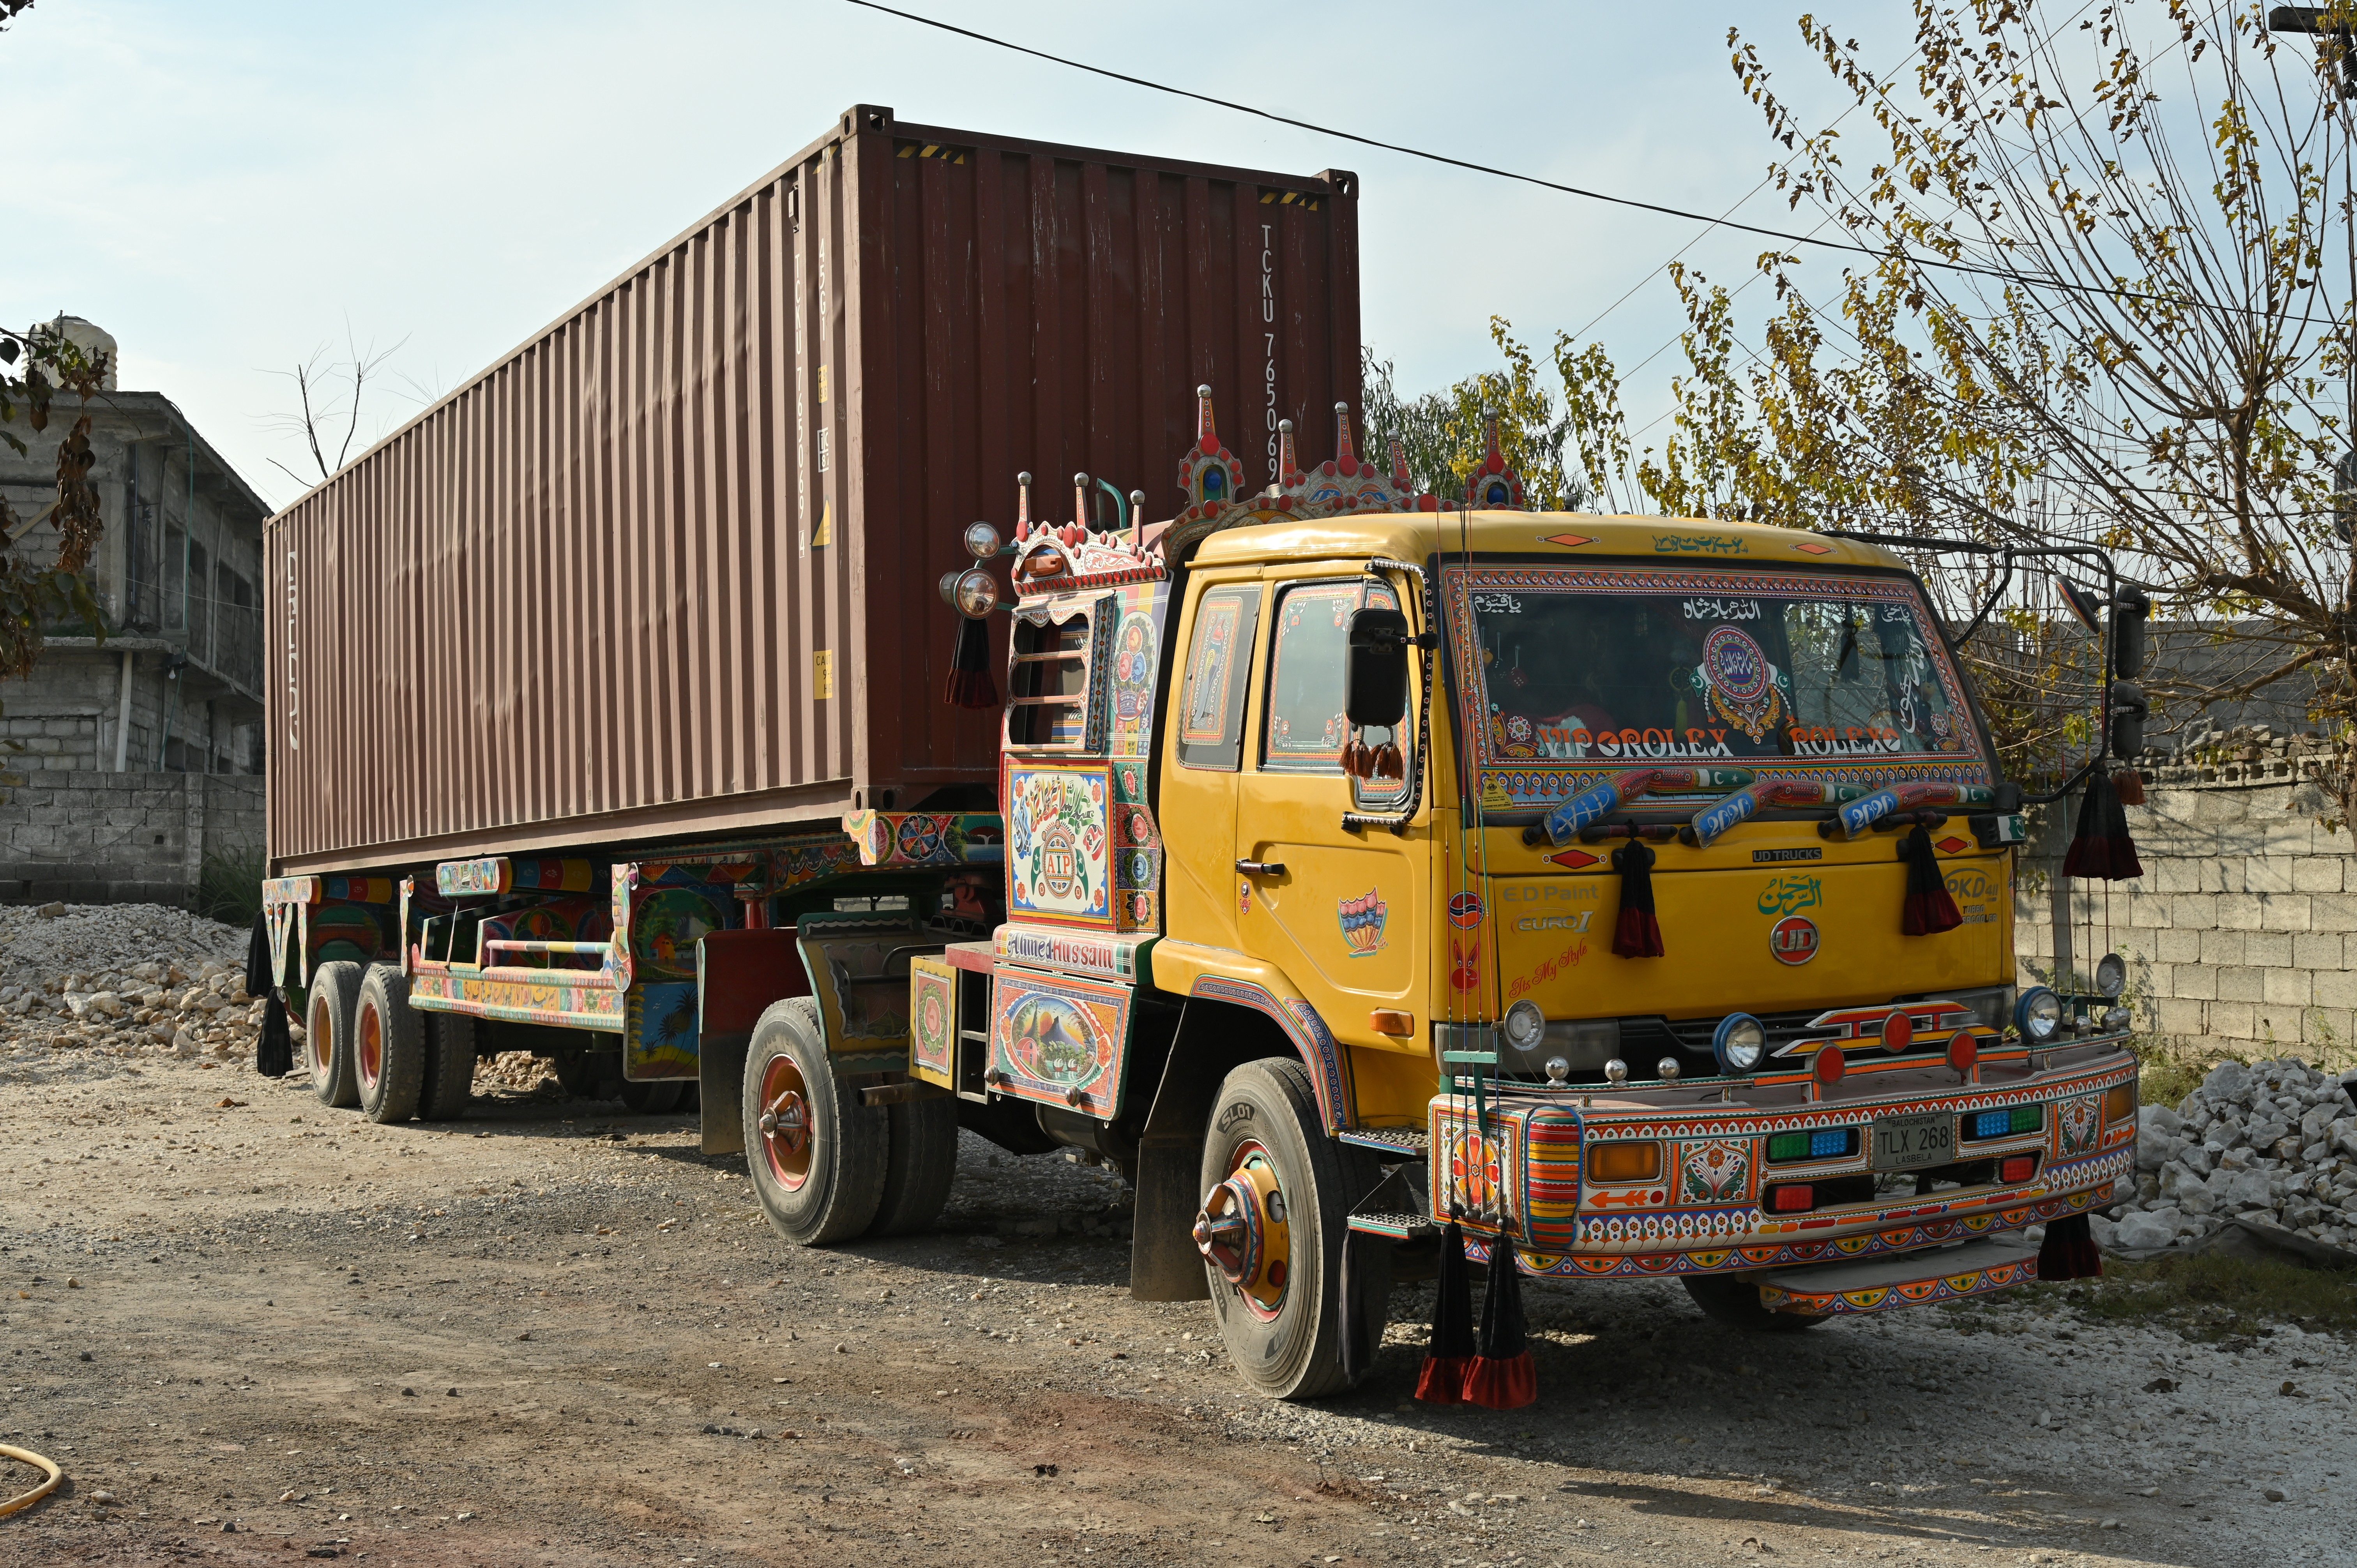 The Cargo truck at the construction site